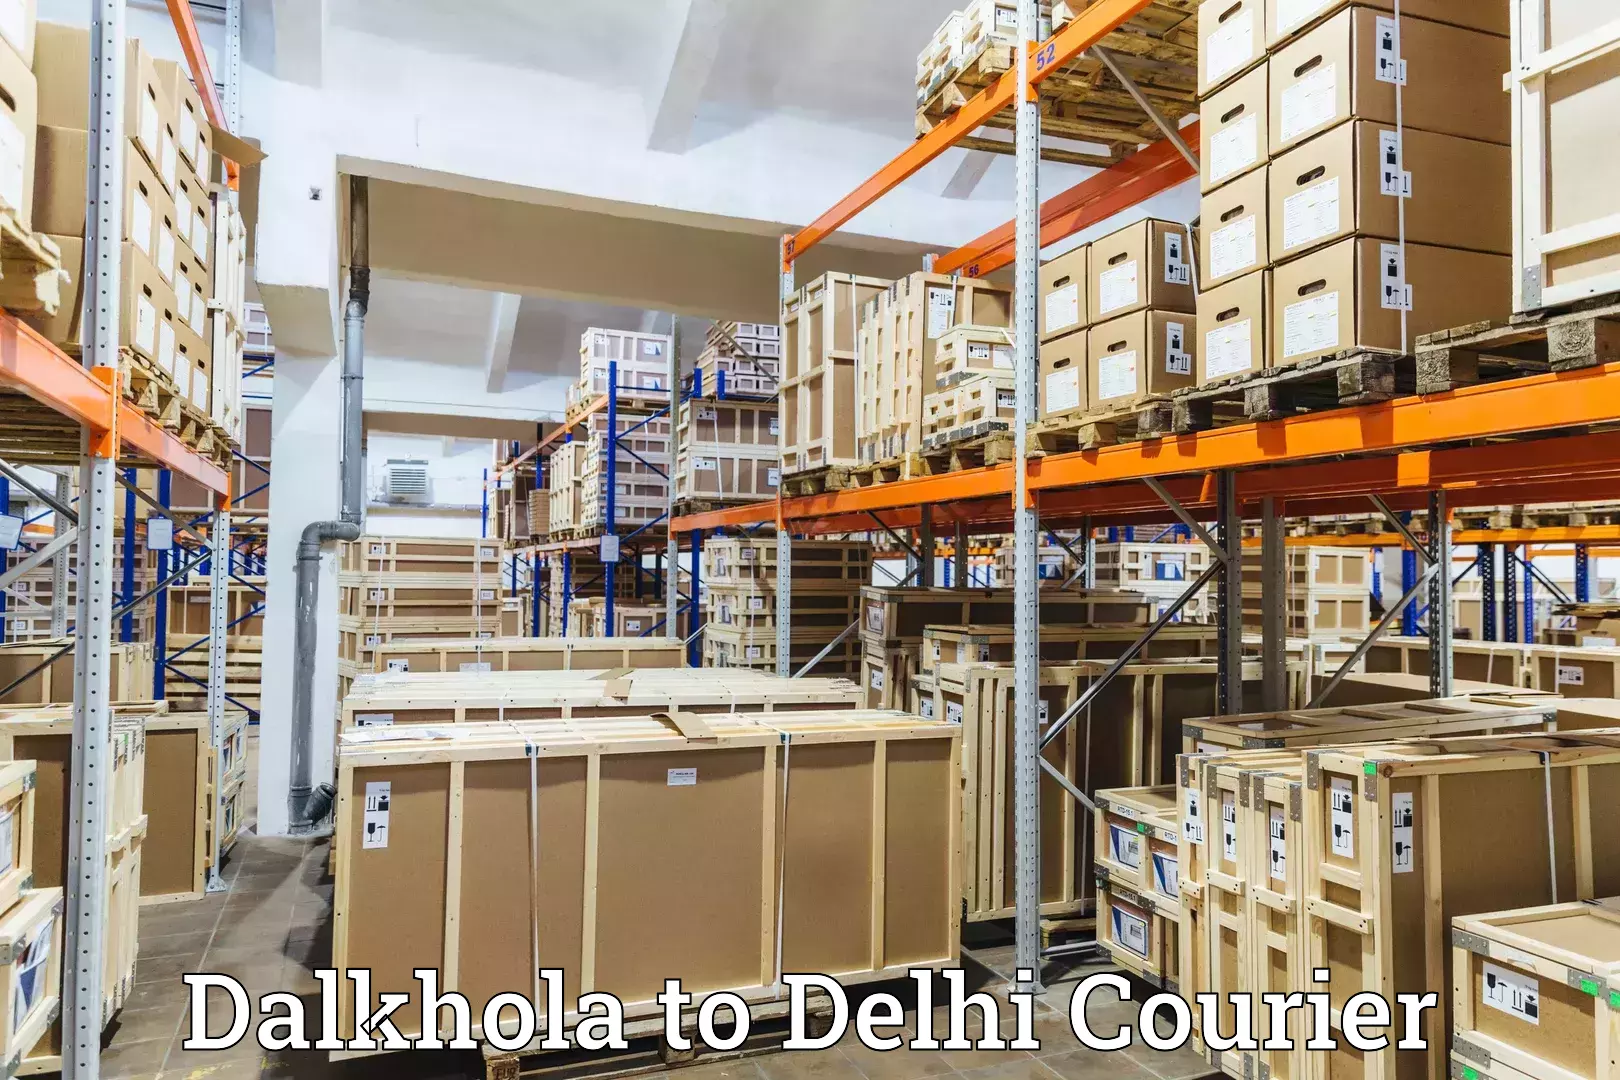 Courier service innovation in Dalkhola to Lodhi Road